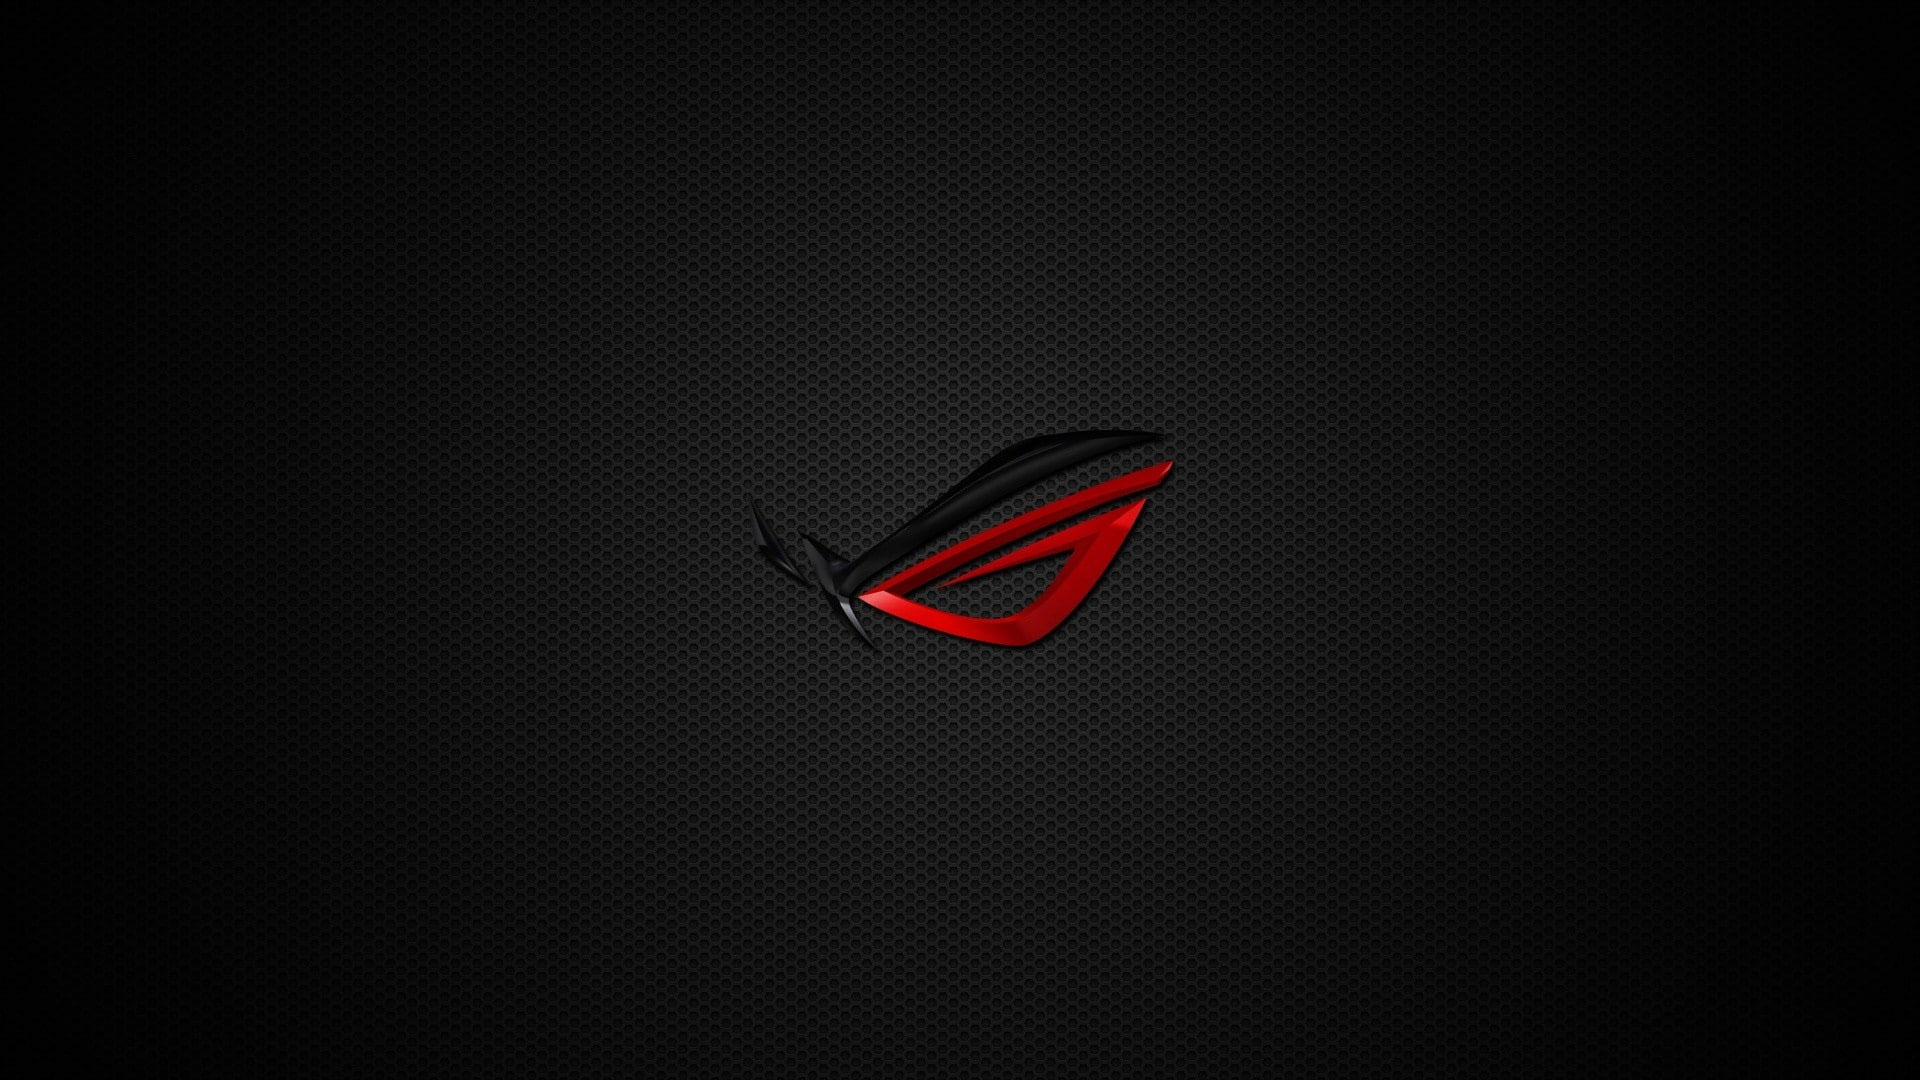 Wallpaper Asus Rog Republic Of Gamers Technology